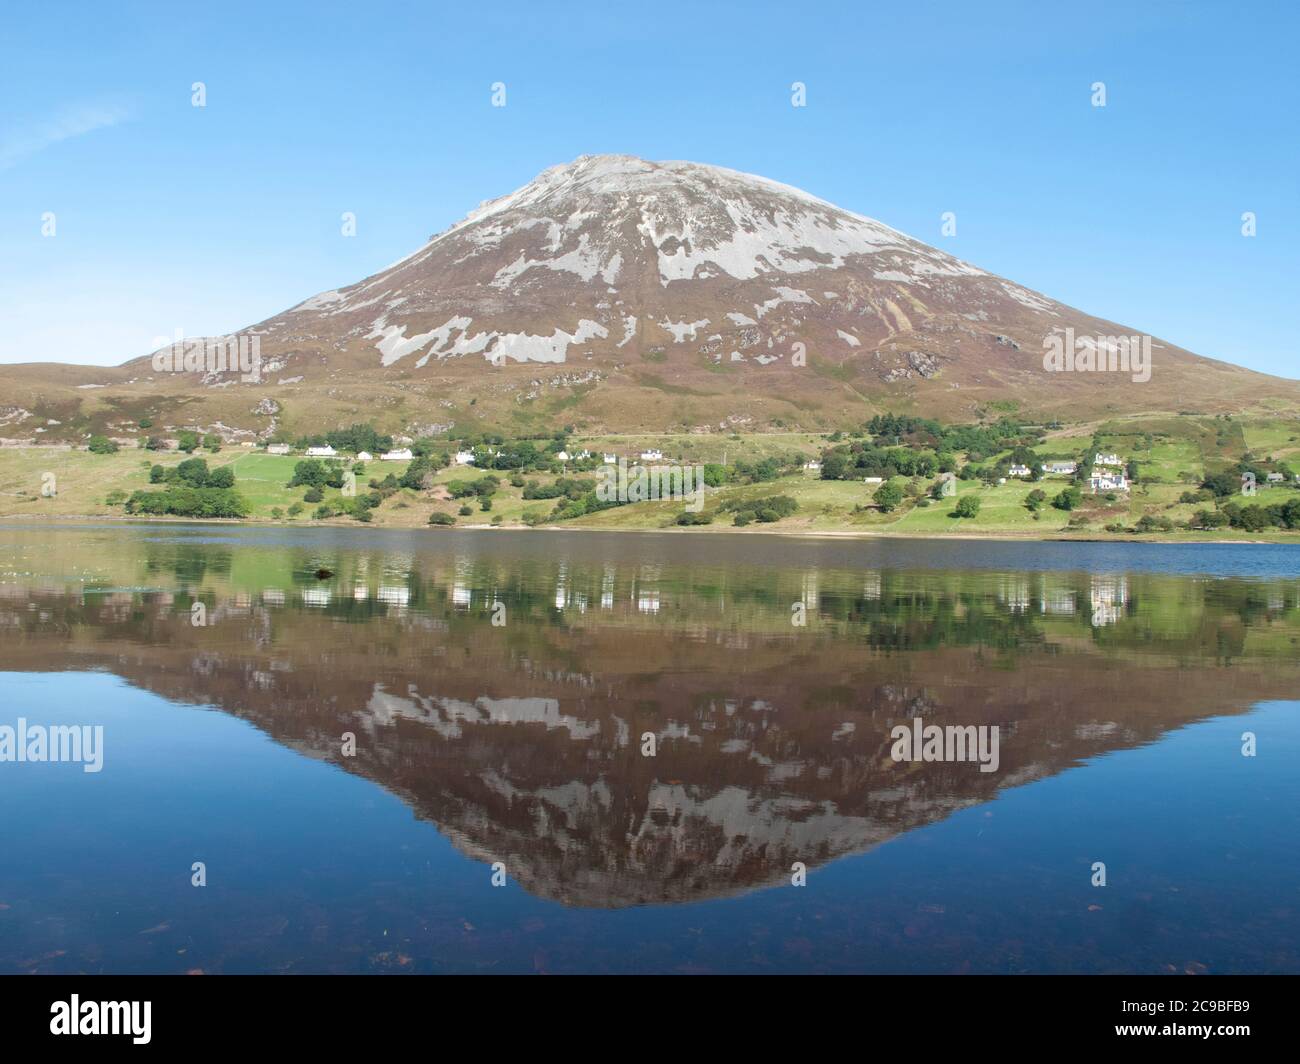 Mount Errigal with reflection in lake, Wild Atlantic Way, Donegal, Ireland Stock Photo